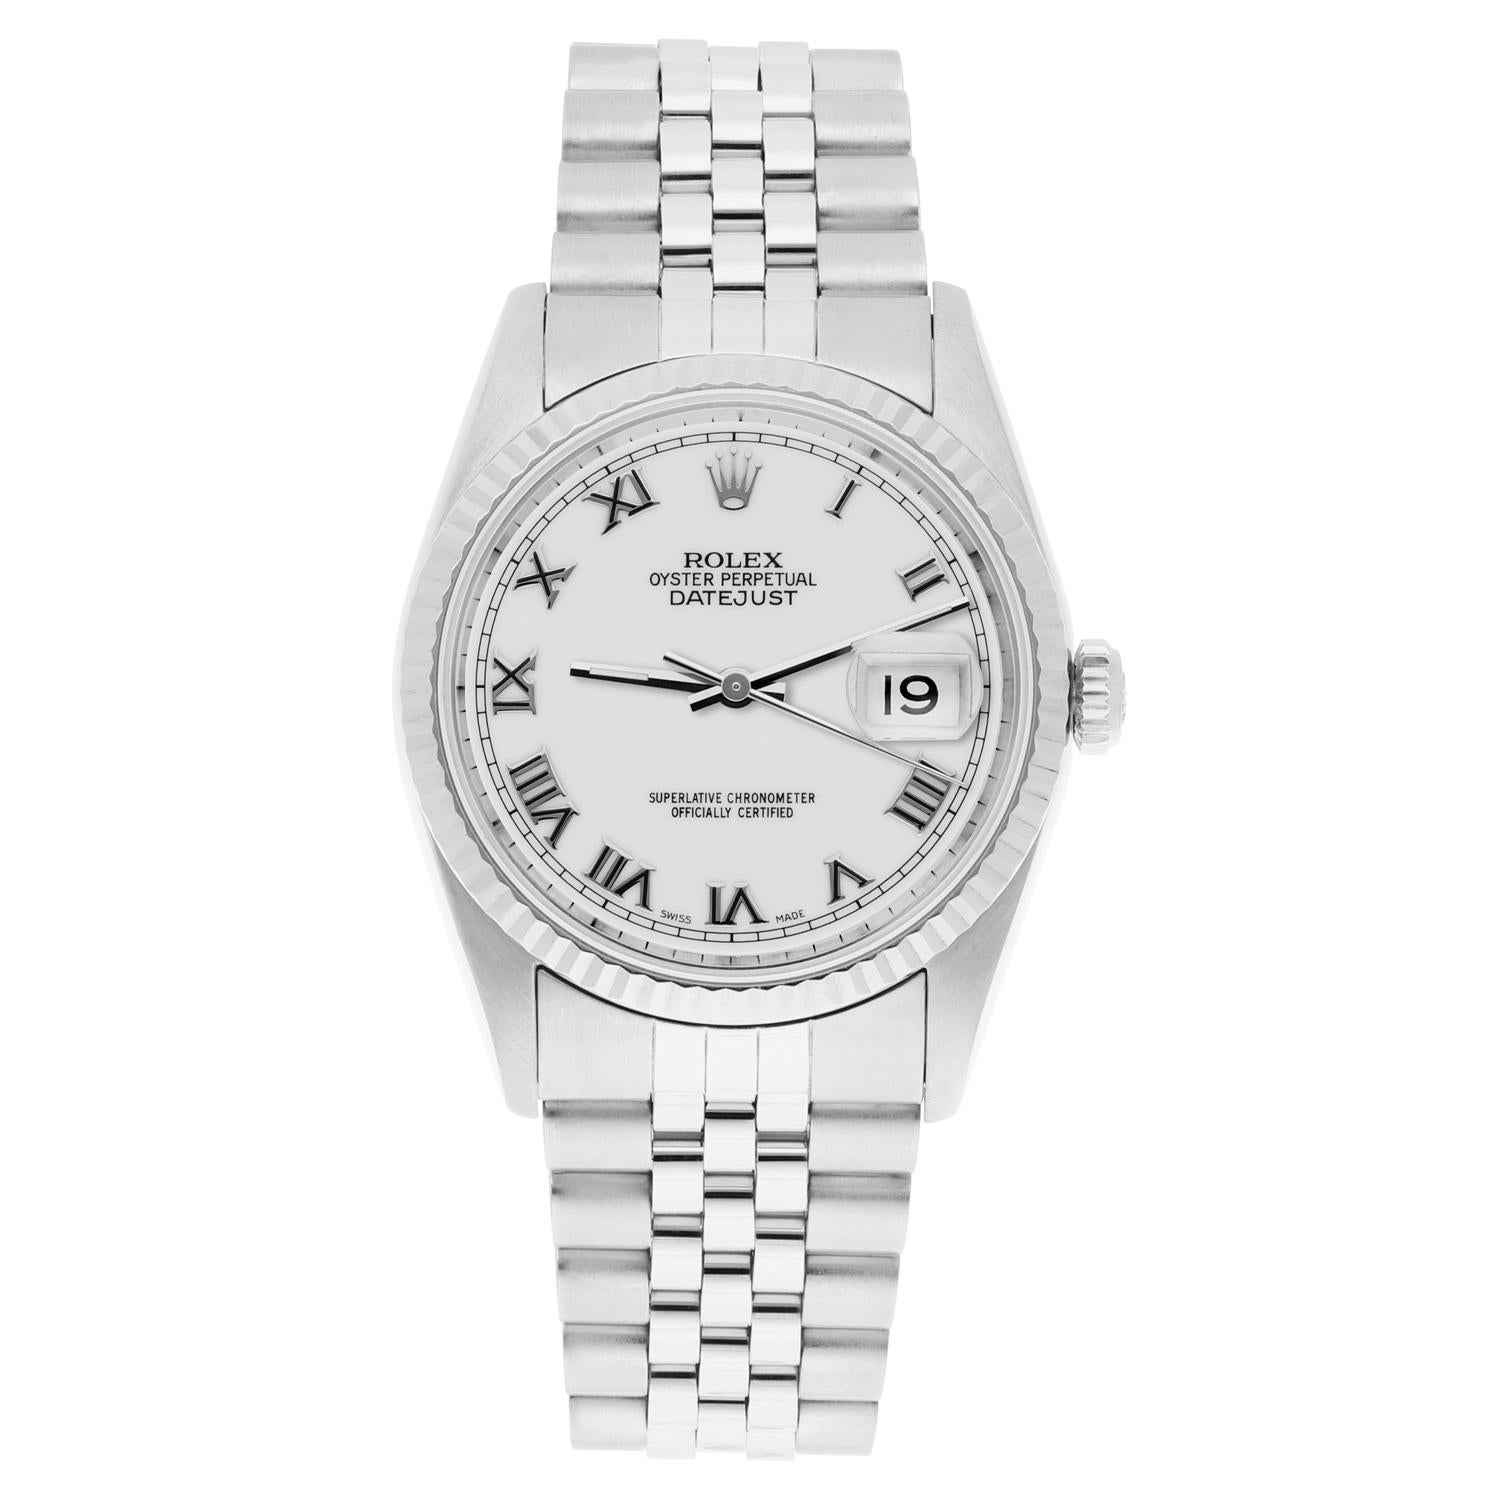 This watch has been professionally polished, serviced and is in excellent overall condition. There are absolutely no visible scratches or blemishes. Model features quick-set movement. Authenticity guaranteed! The sale comes with a jewelry box,